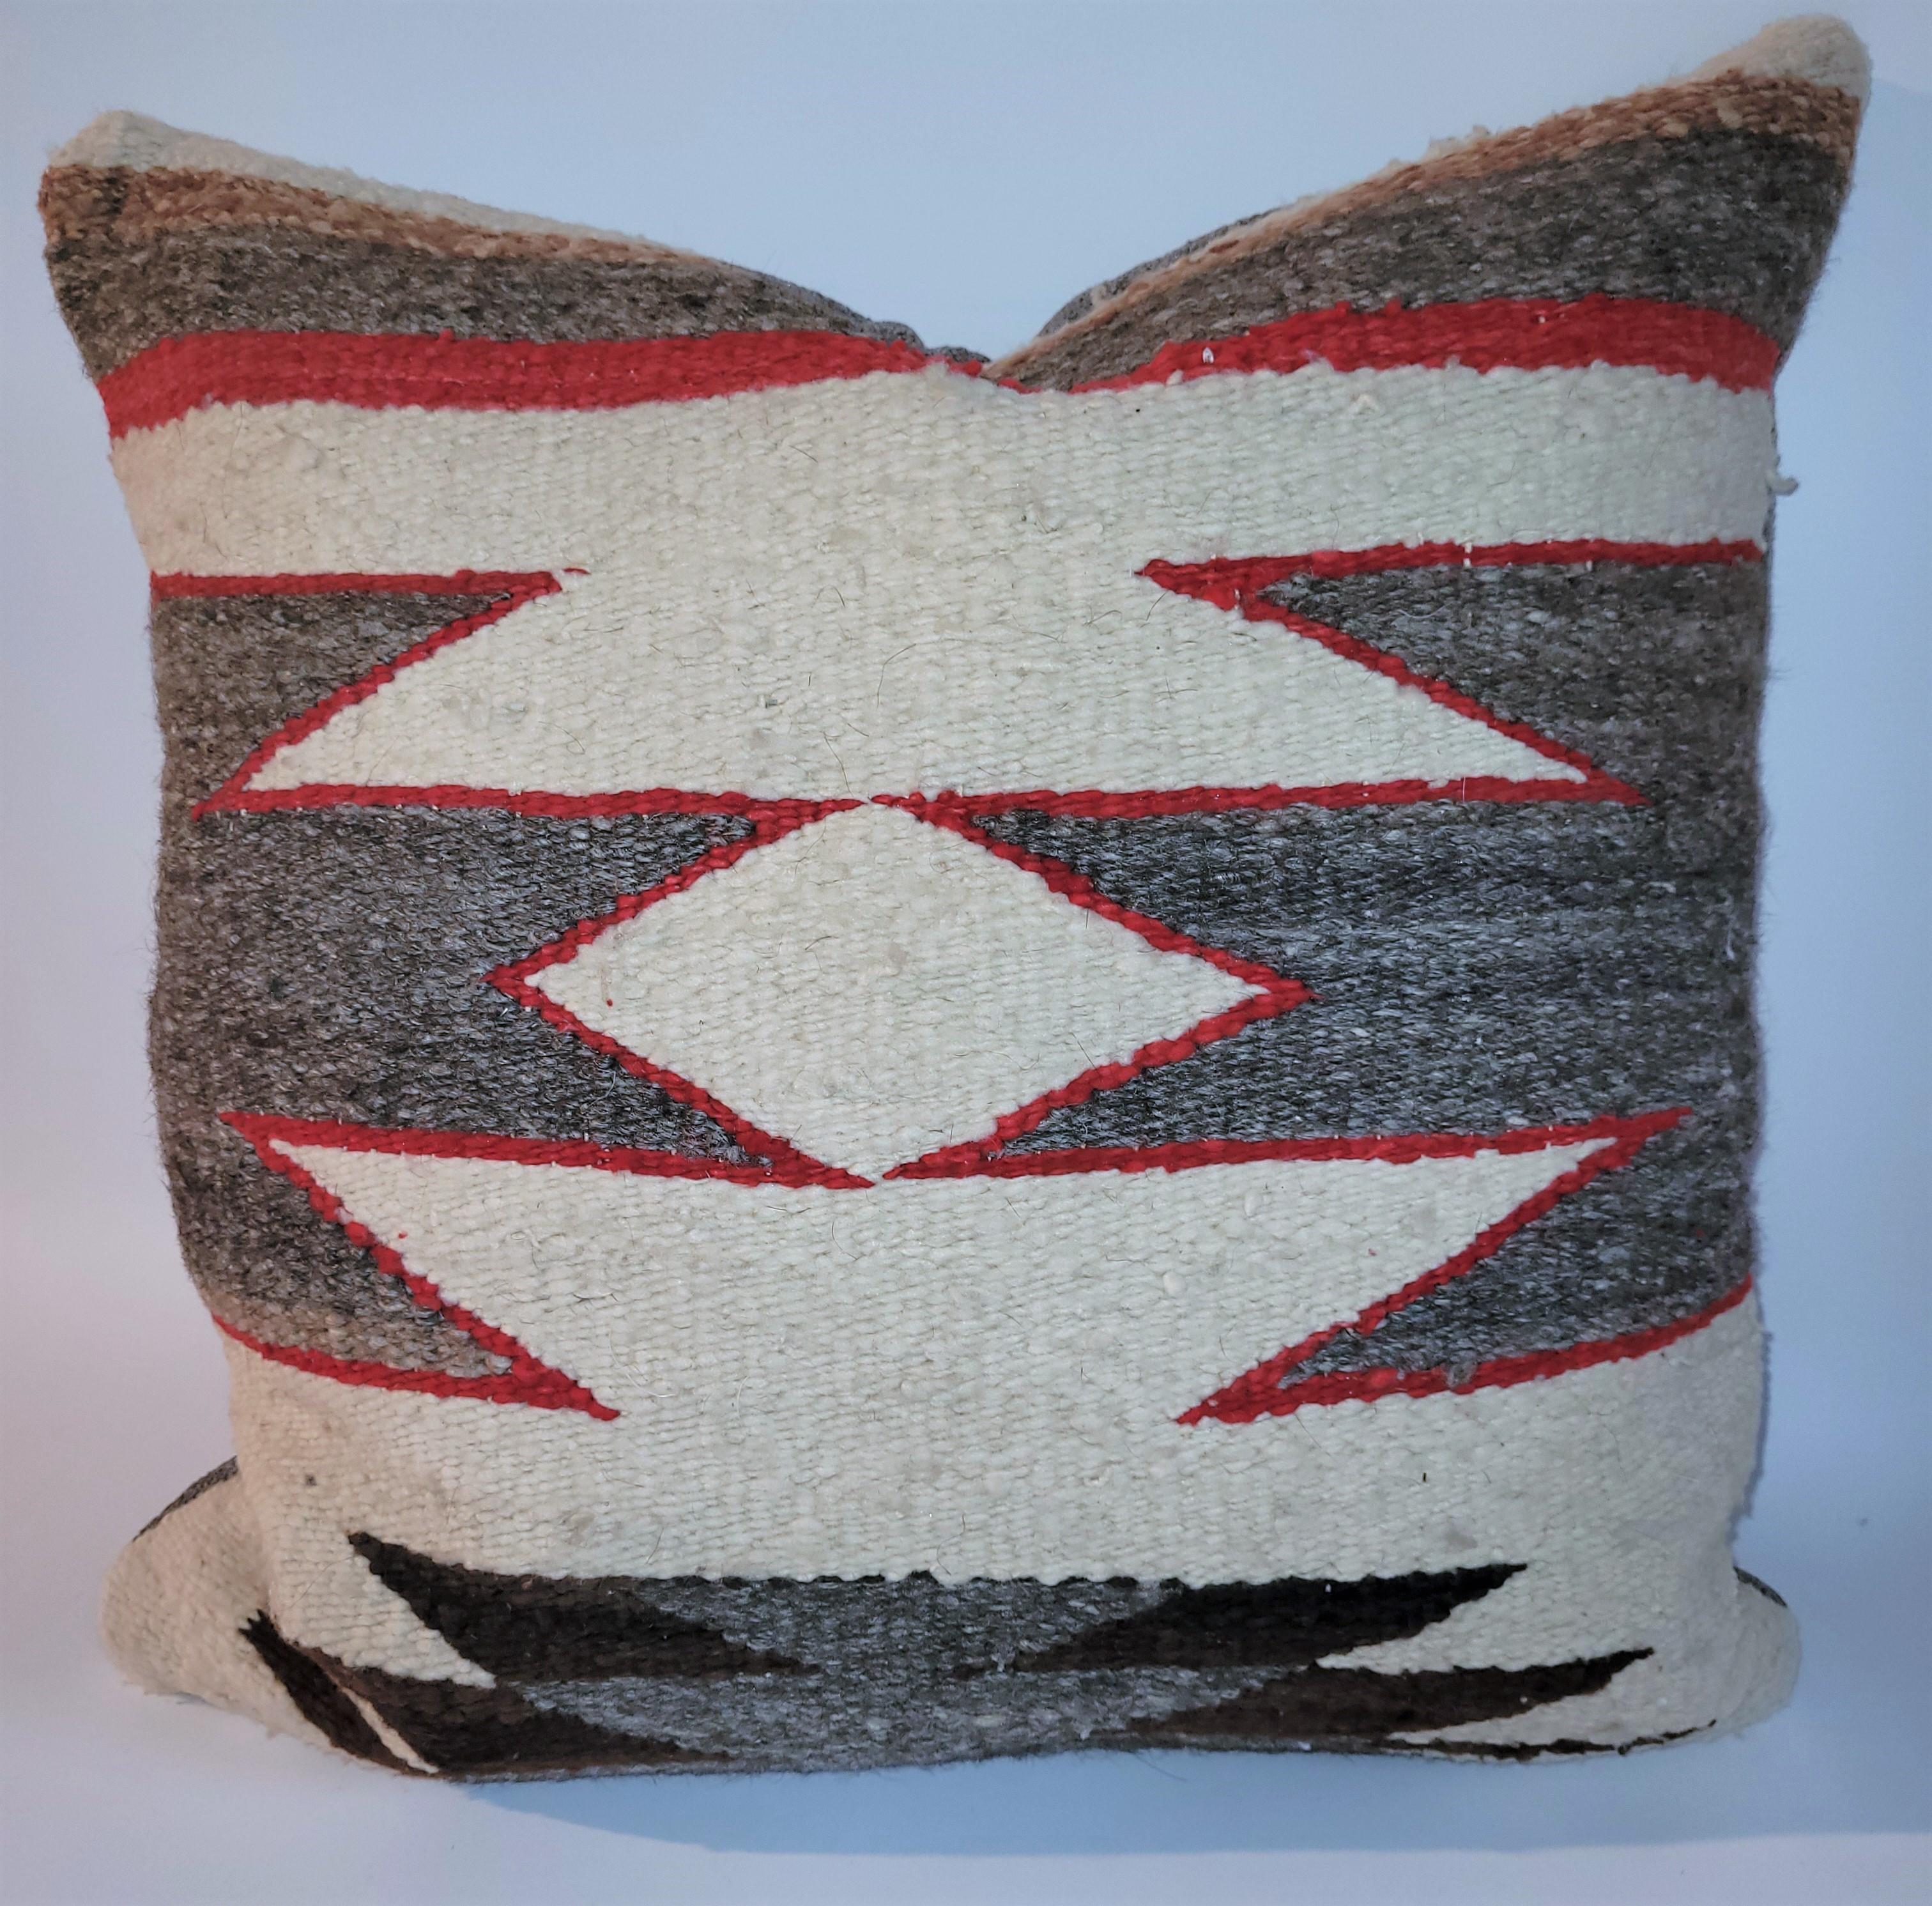 Custom made from a vintage Eye Dazzler Navajo rug. Pillow has a feather and down insert and a zippered case.